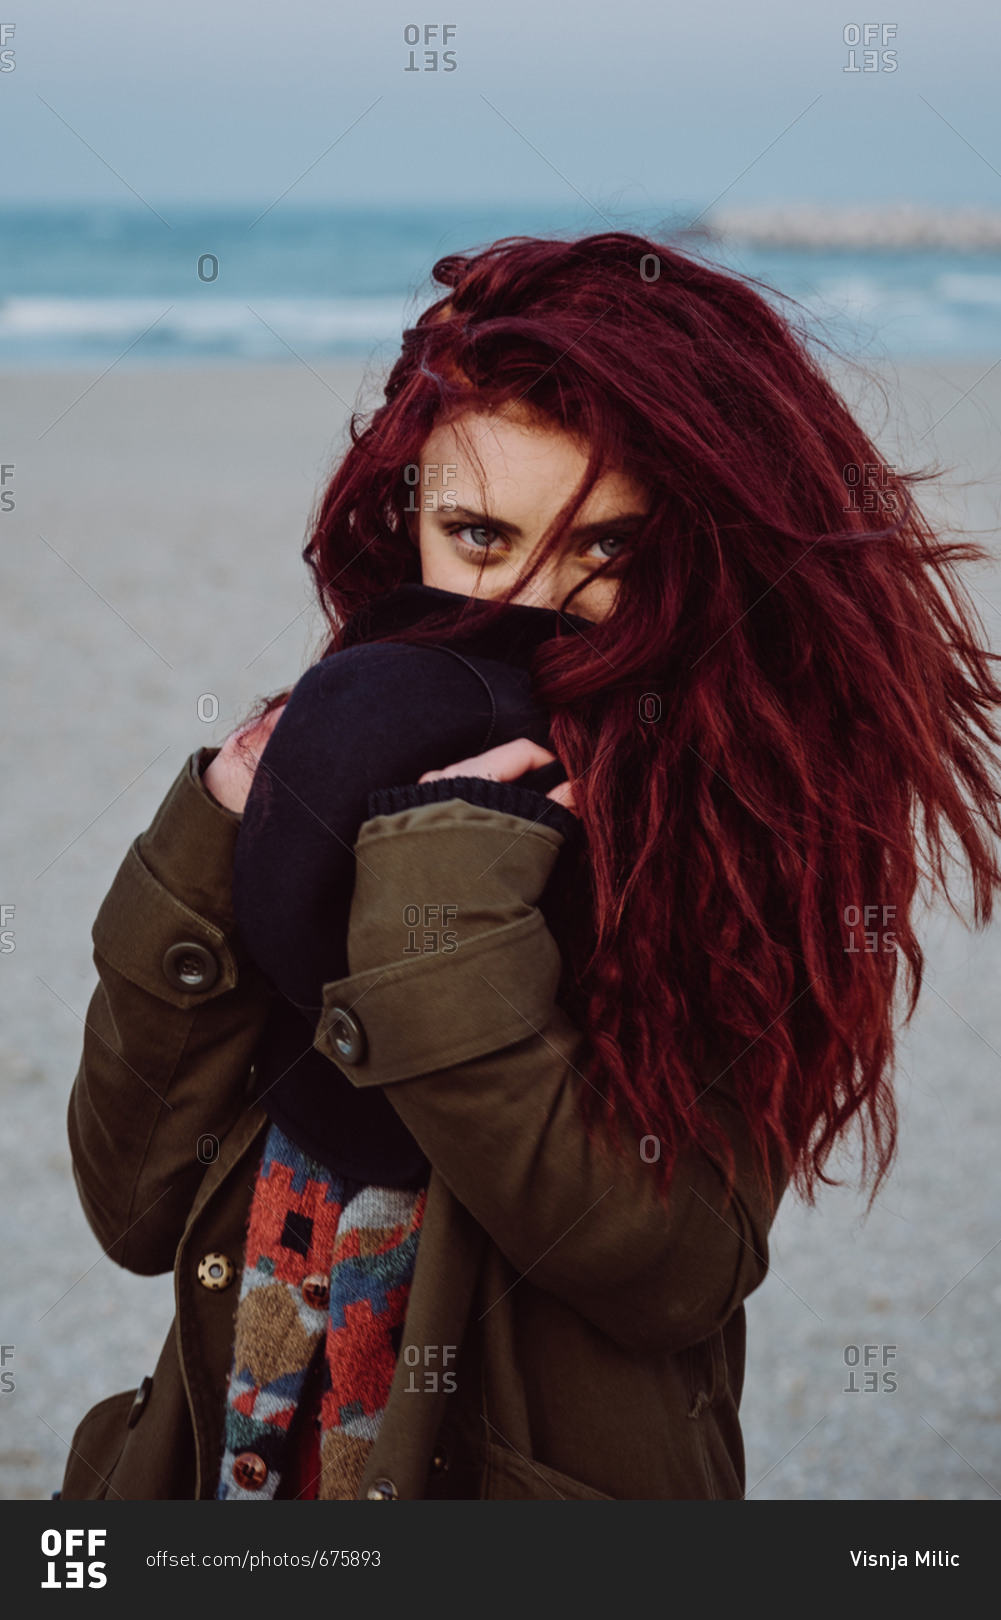 Teenager girl with long red hair walking on the beach wearing retro clothes covering her face with a hat